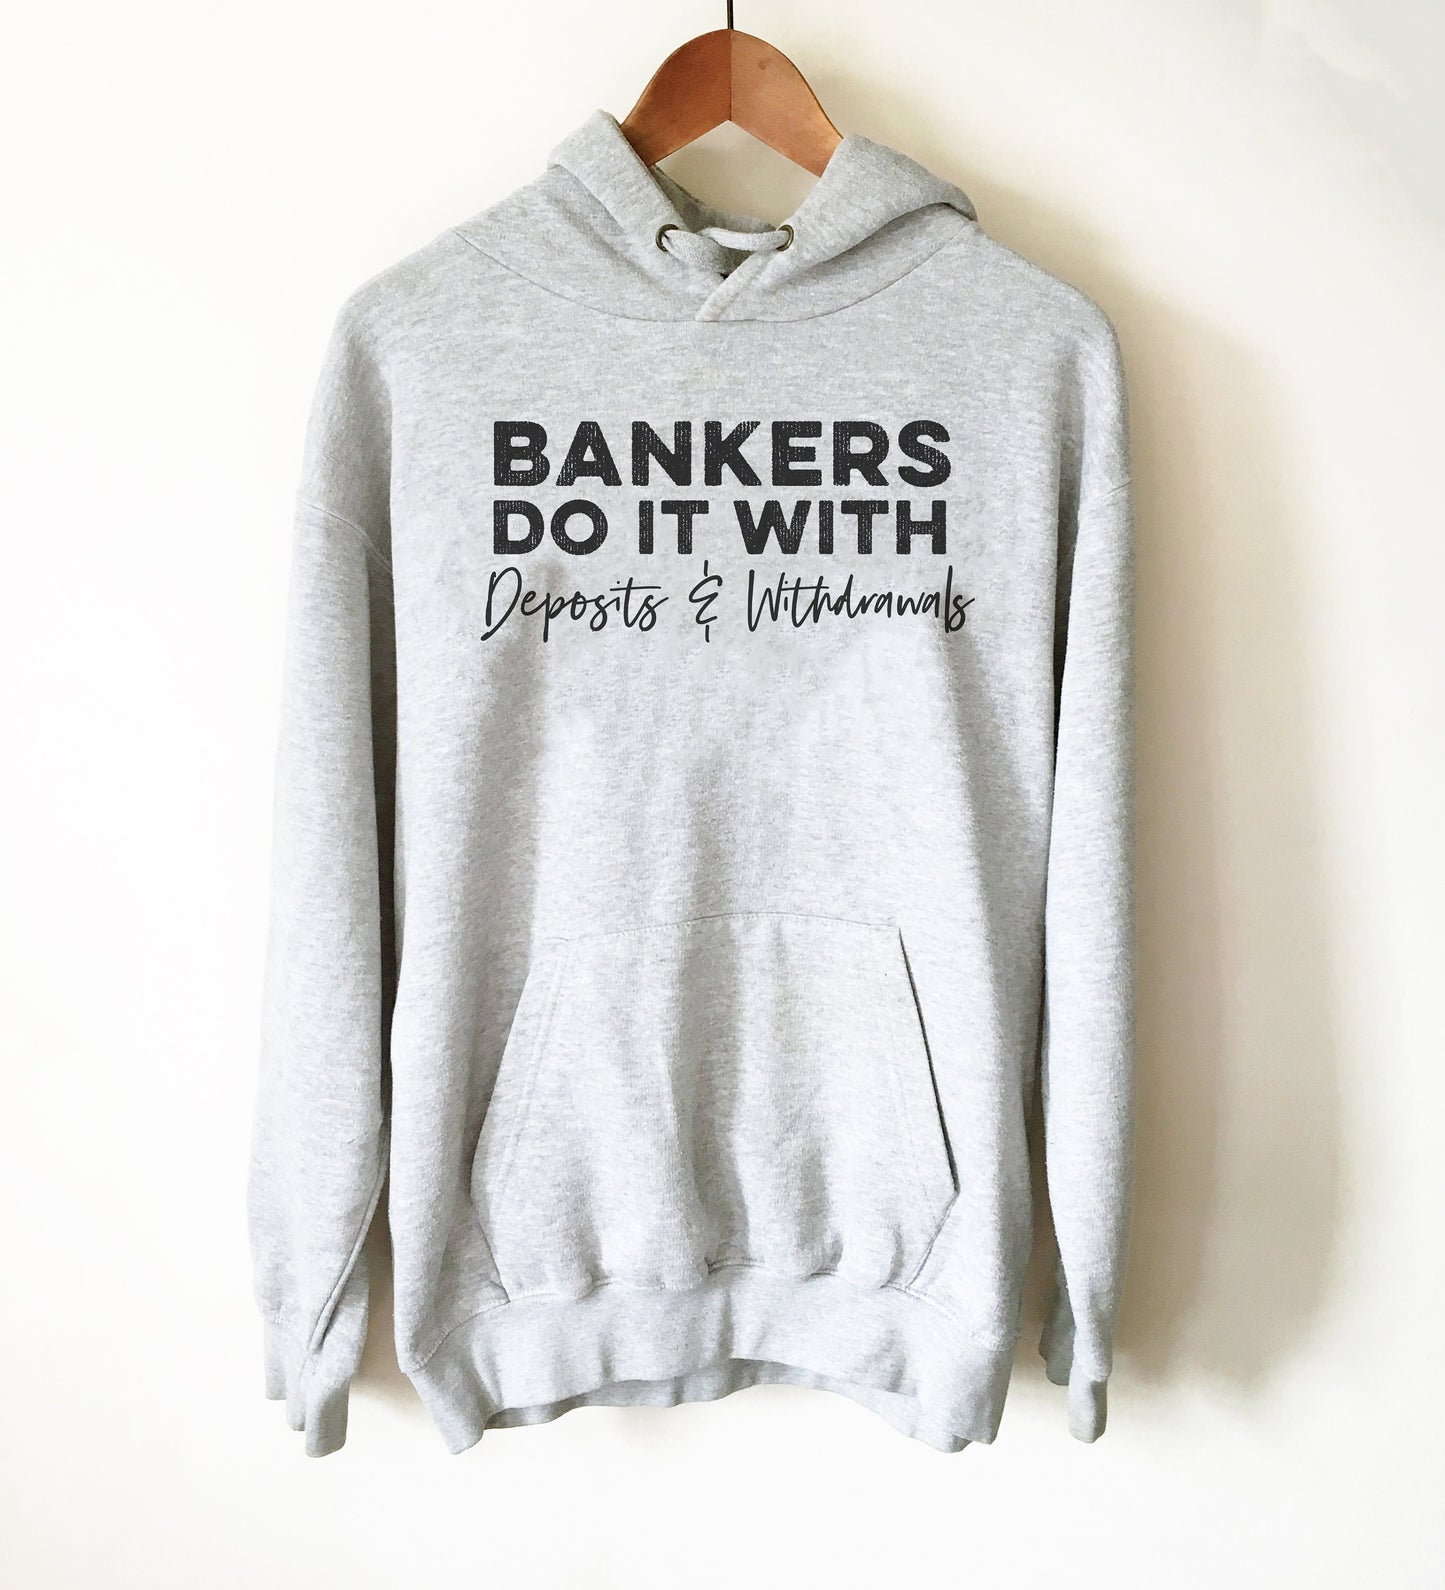 Bankers Do It With Deposits And Withdrawals Hoodie - Banker Shirt, Banker Gift, Banking Shirt, Banking Gift, Coworker Gift, Manager Shirt